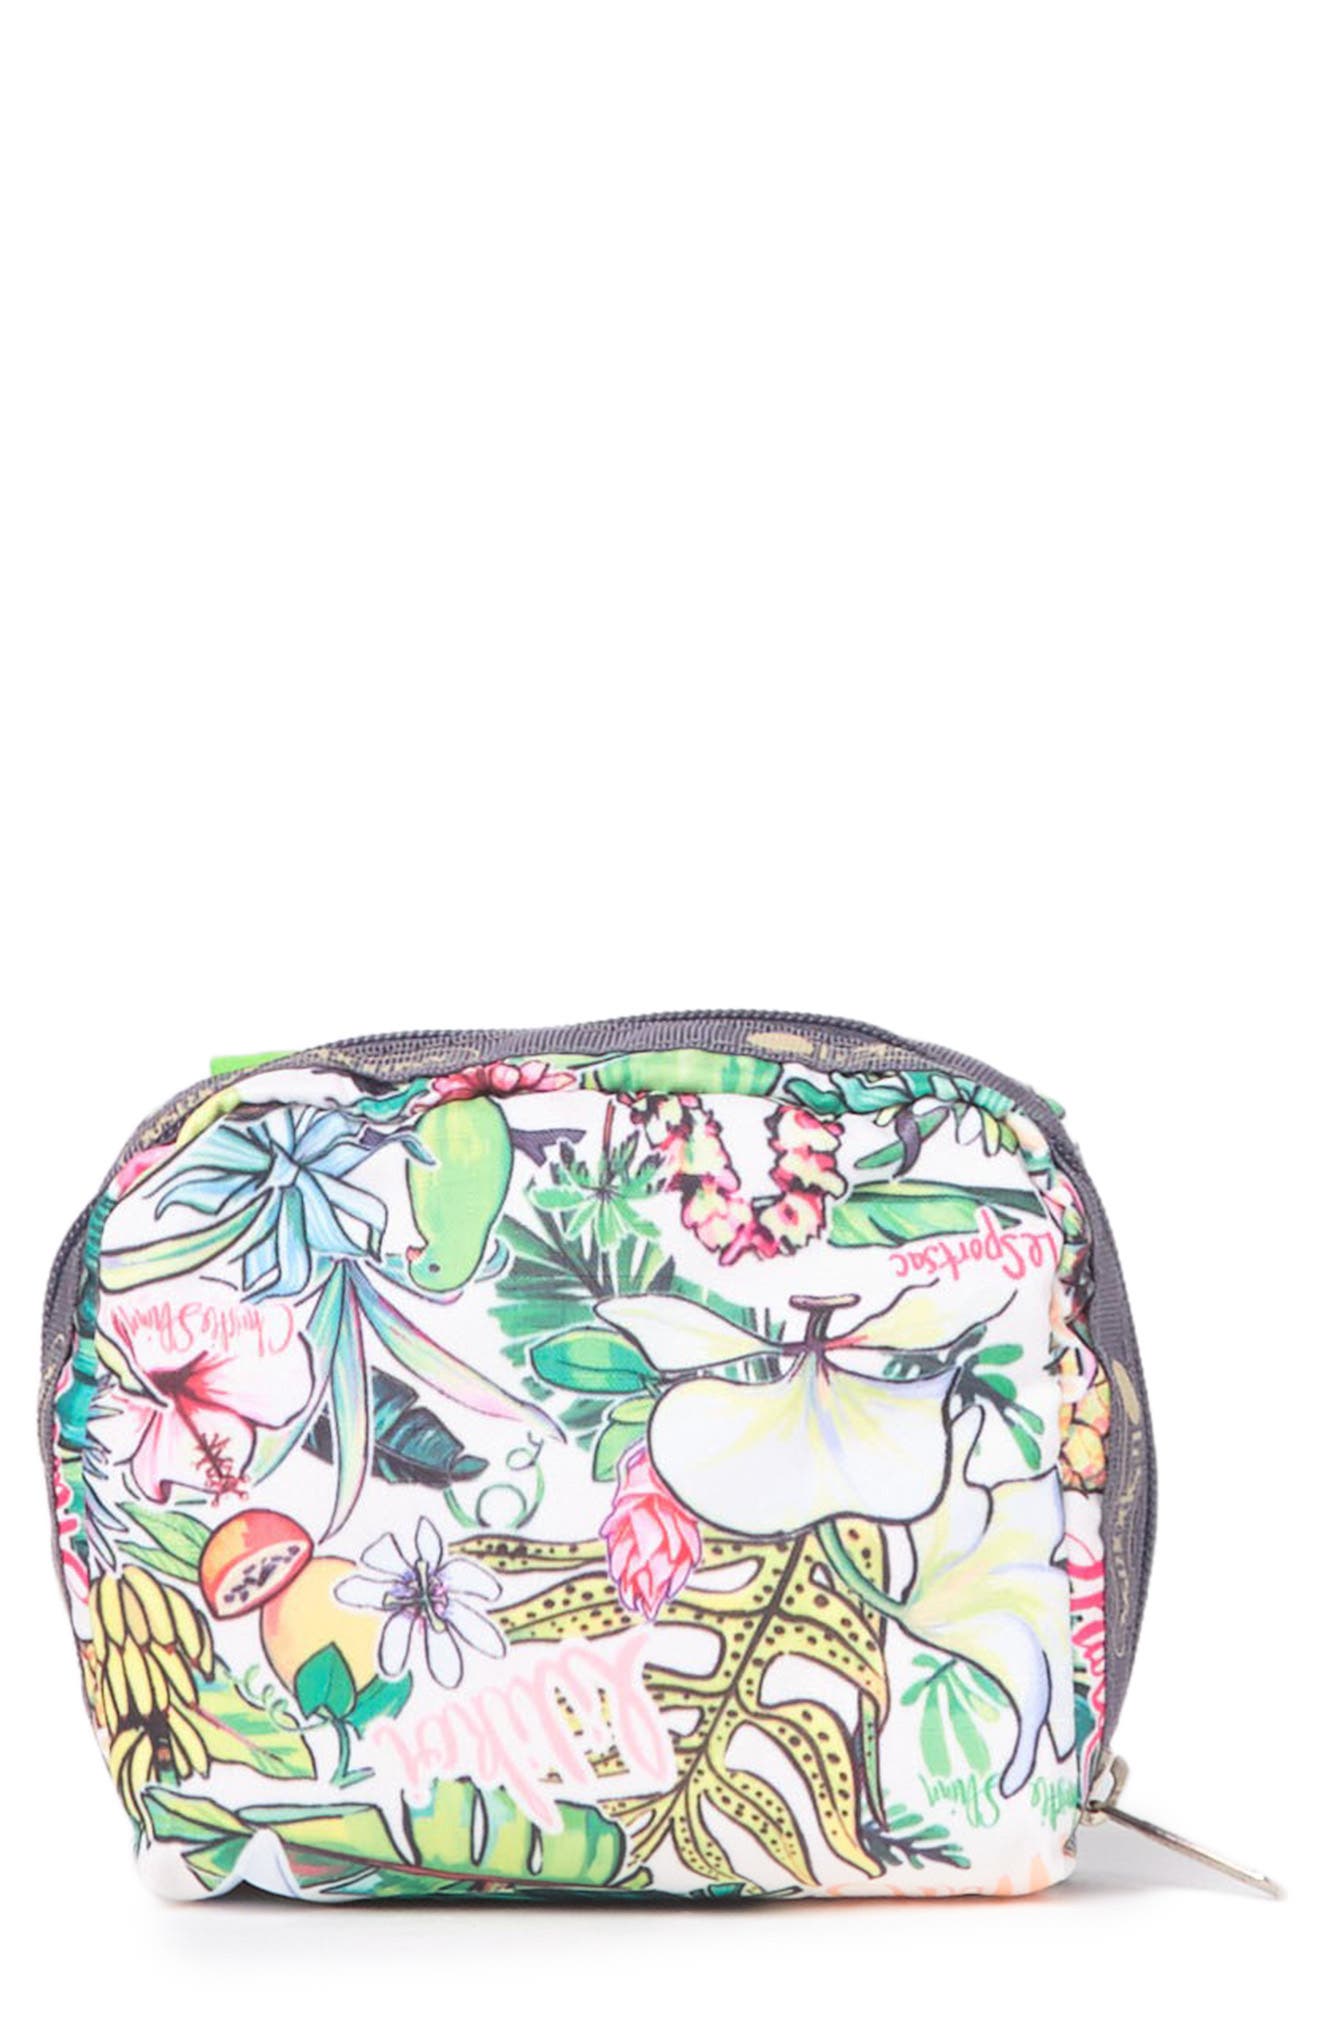 Lesportsac Patterned Square Cosmetic Bag In Aloha Market